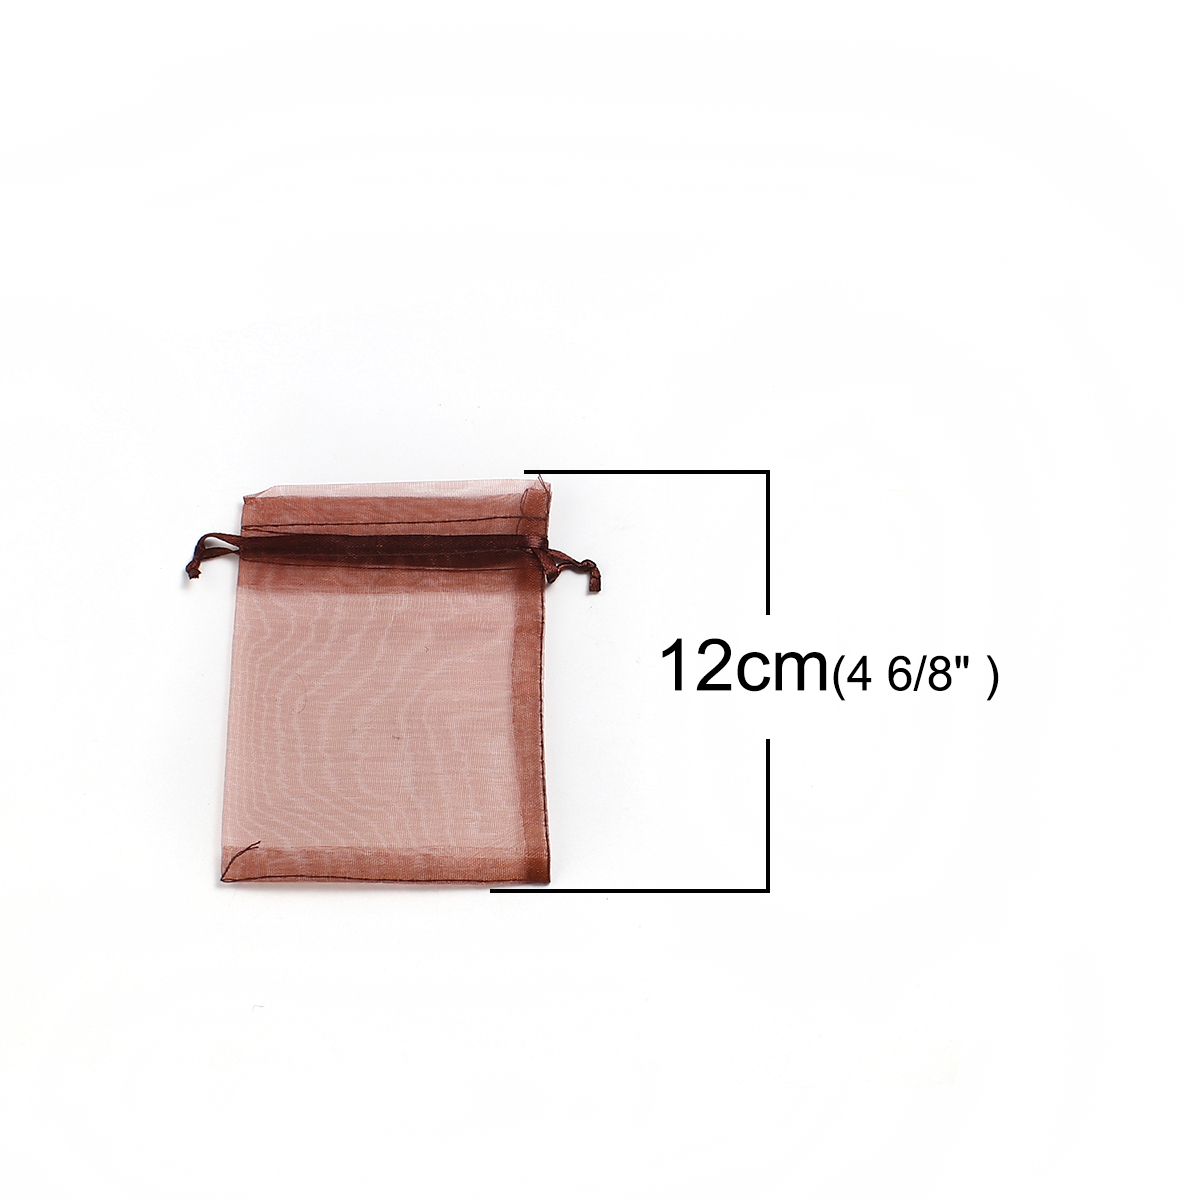 Picture of Wedding Gift Organza Jewelry Bags Drawstring Rectangle Coffee (Usable Space: 9.5x9cm) 12cm(4 6/8") x 9cm(3 4/8"), 50 PCs